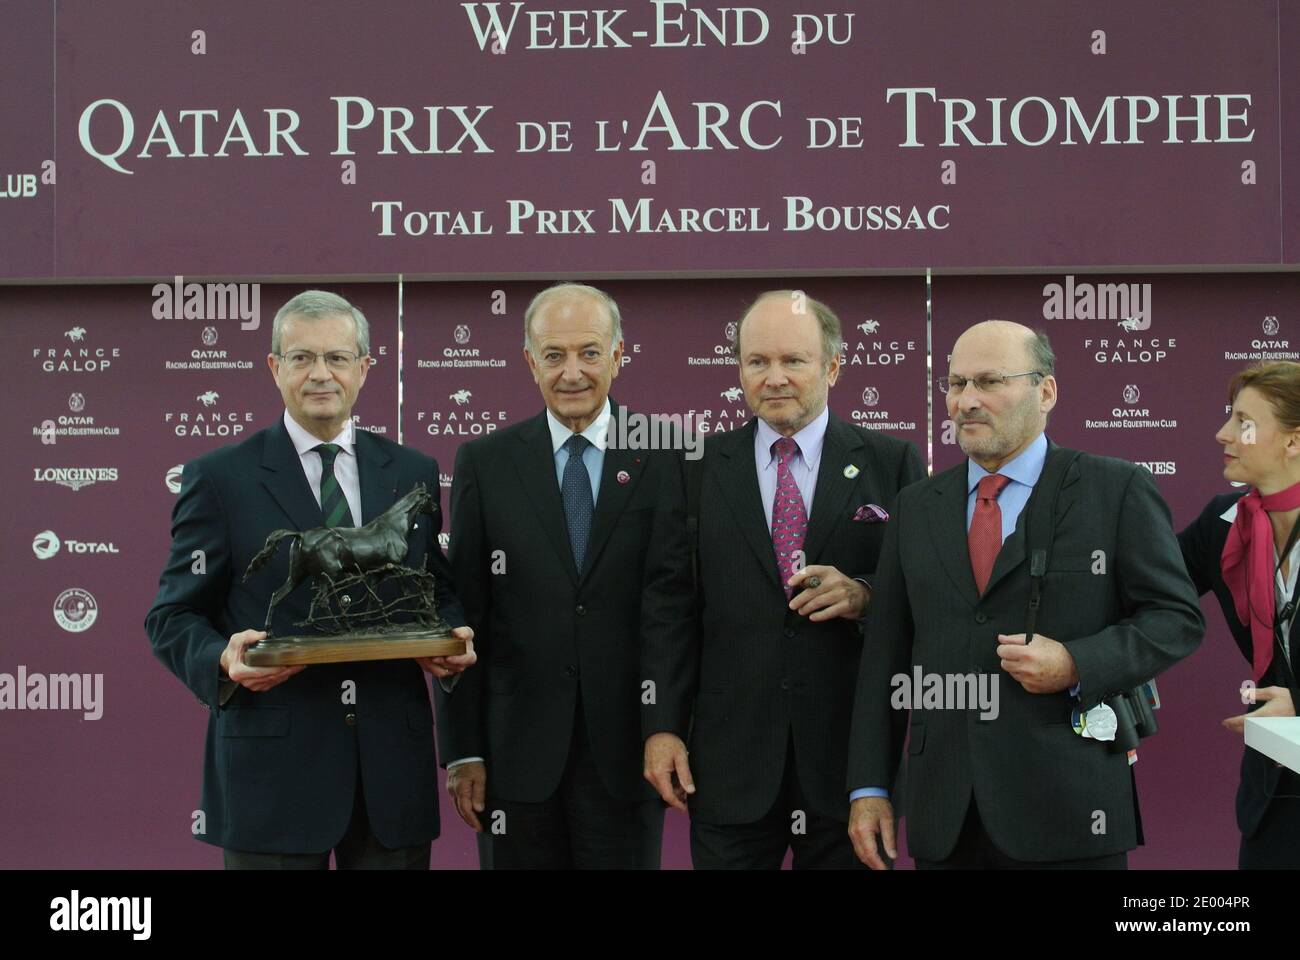 Alain (2nd from right) and Gerard Wertheimer (1st from right